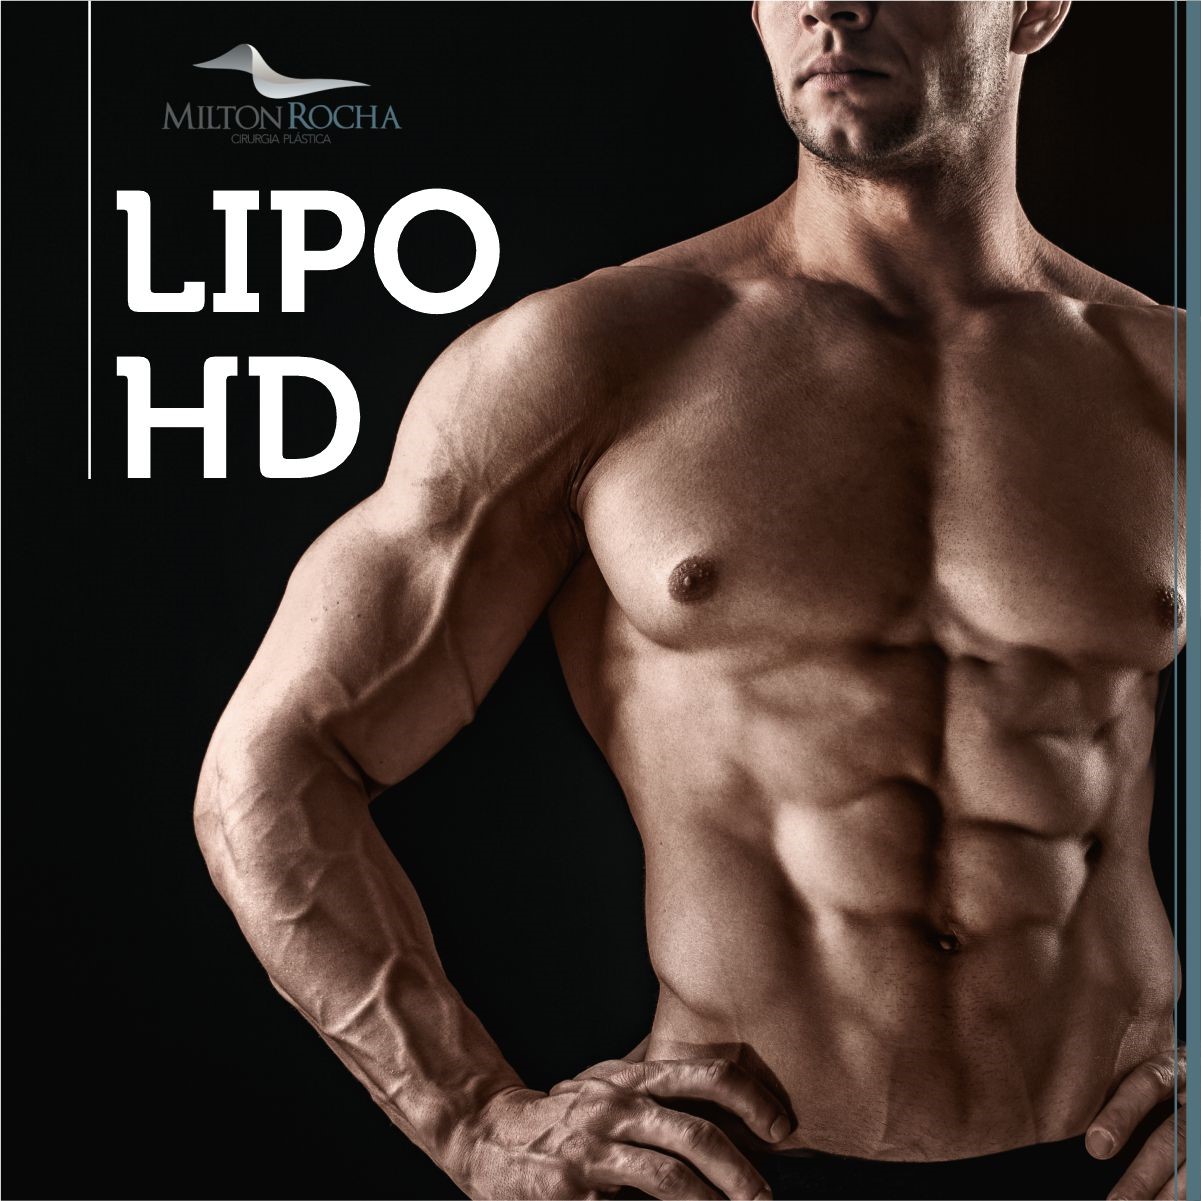 You are currently viewing Cirurgia Plástica Recife – Lipo HD